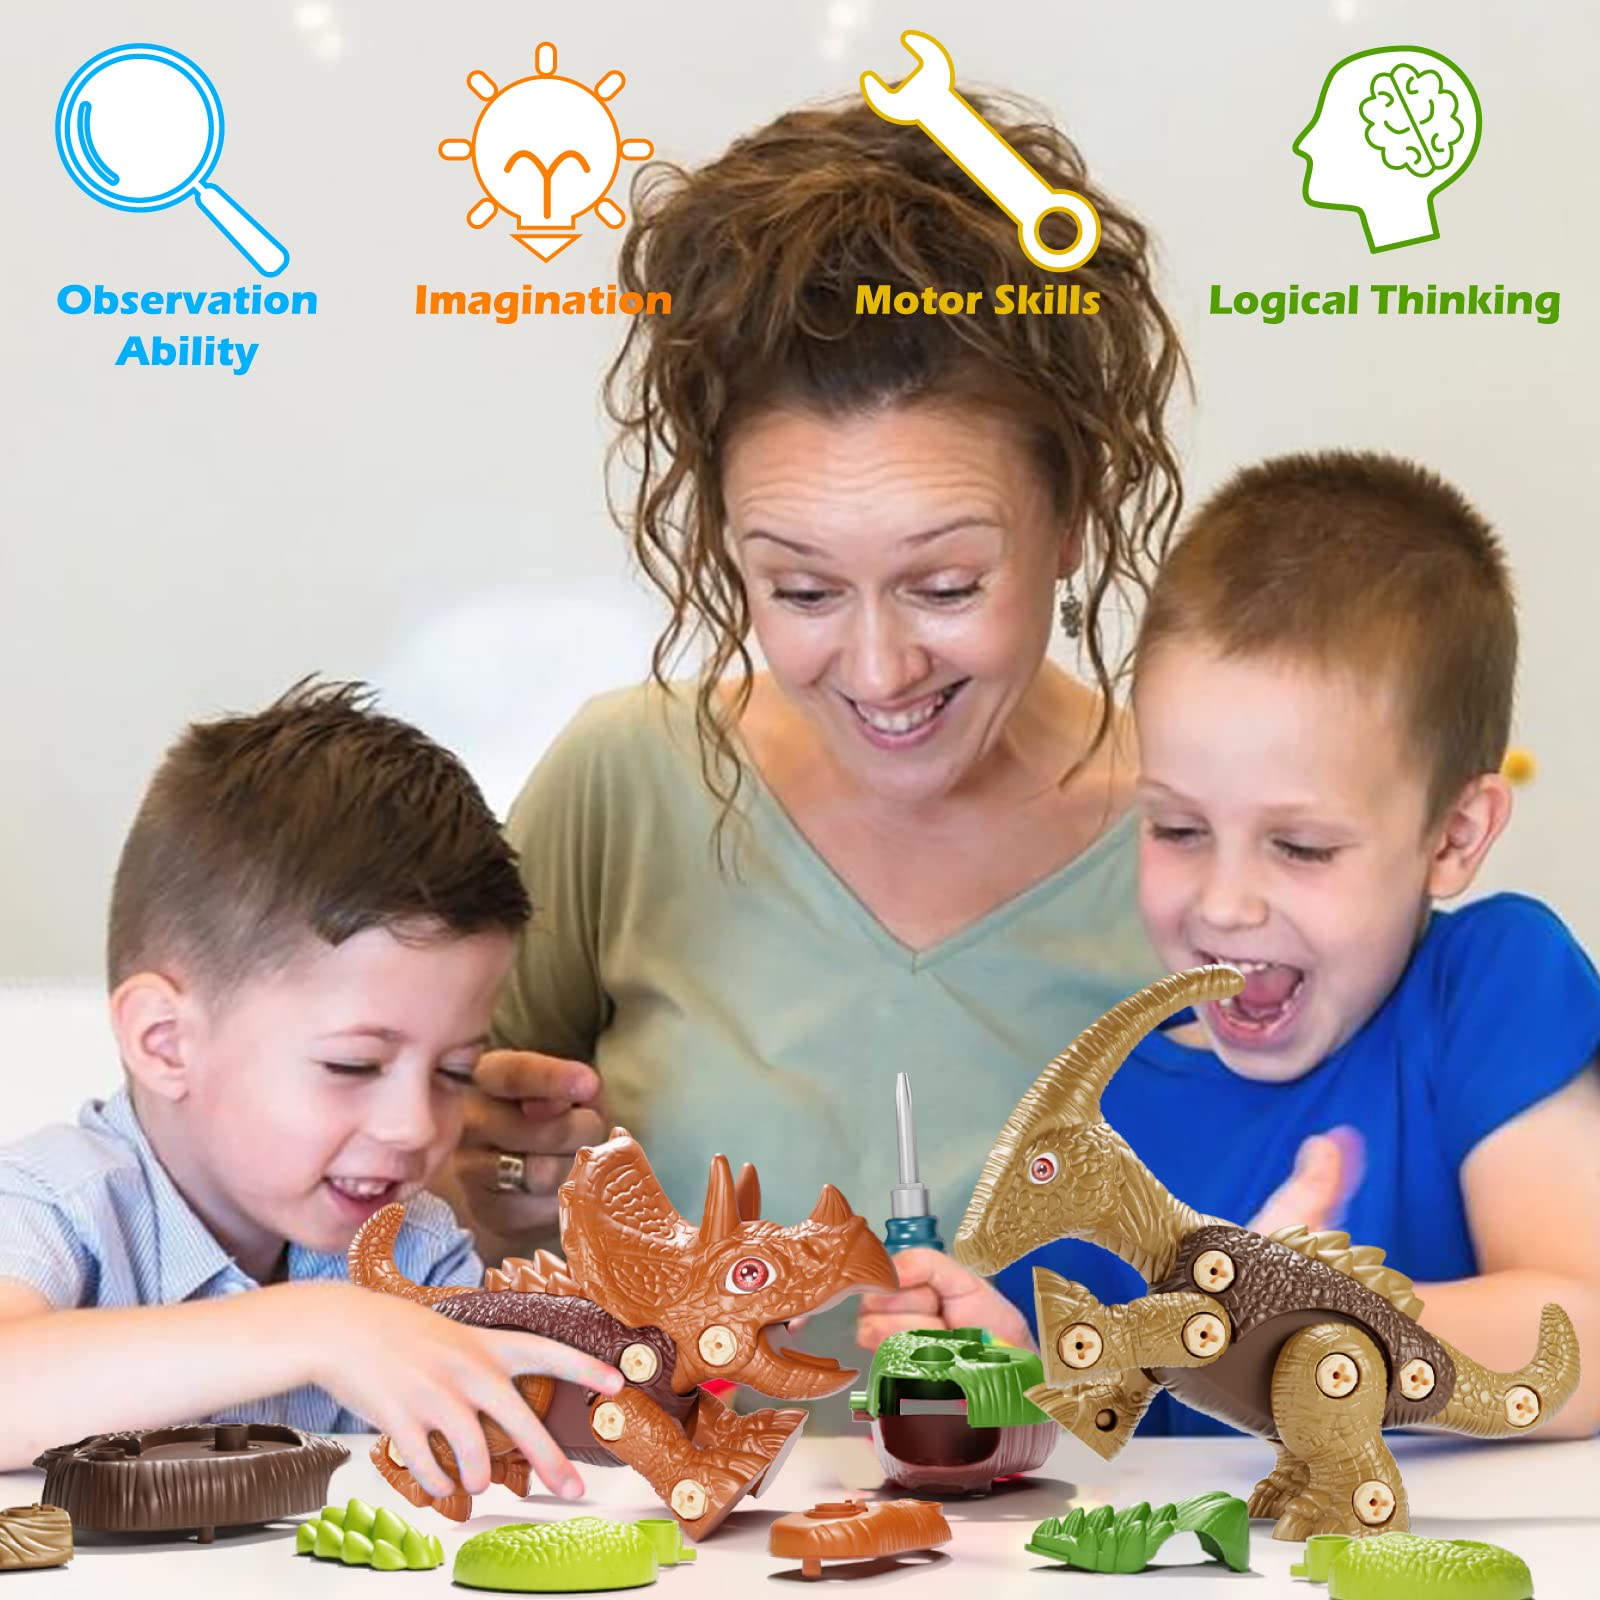 Jasonwell Kids Building Dinosaur Toys - Boys STEM Educational Take Apart Construction Set Learning Kit Creative Activities Games Birthday Gifts for Toddlers Girls Age 3 4 5 6 7 8 Years Old (5PCS)